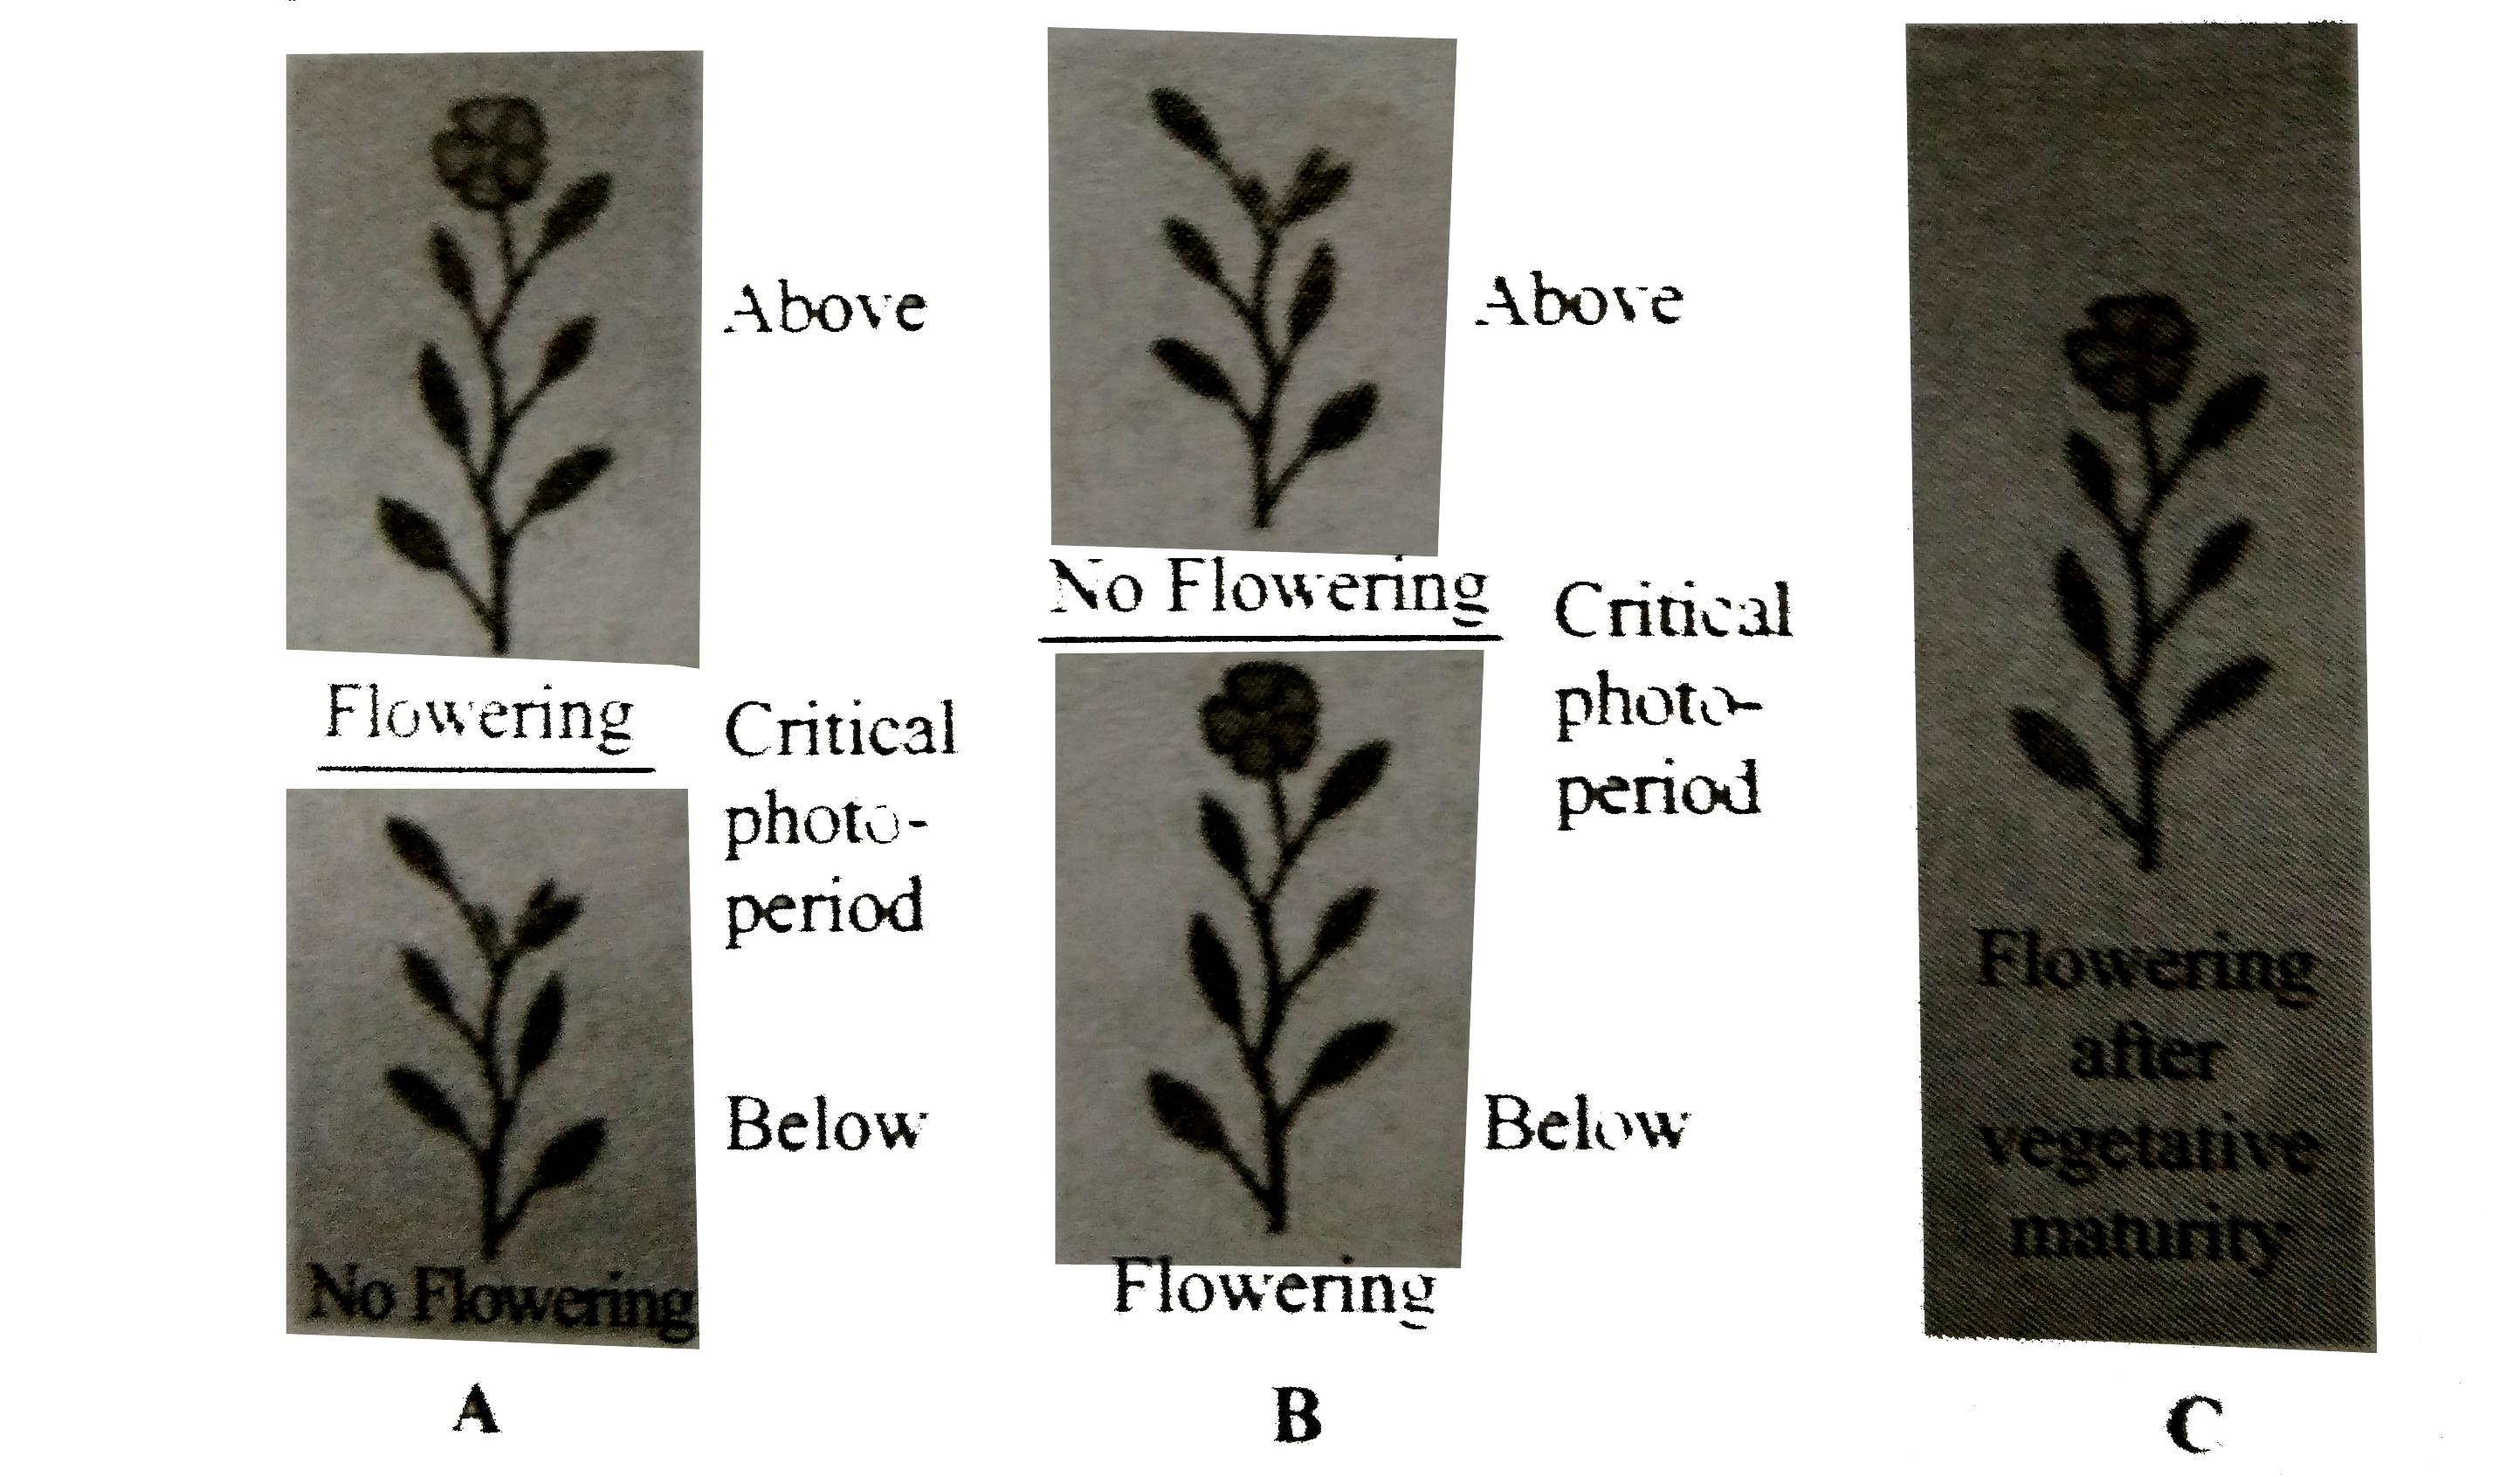 The given figure shows flowering responses of three plants A,B and C to the photoperiod. Select the correct option regarding this.